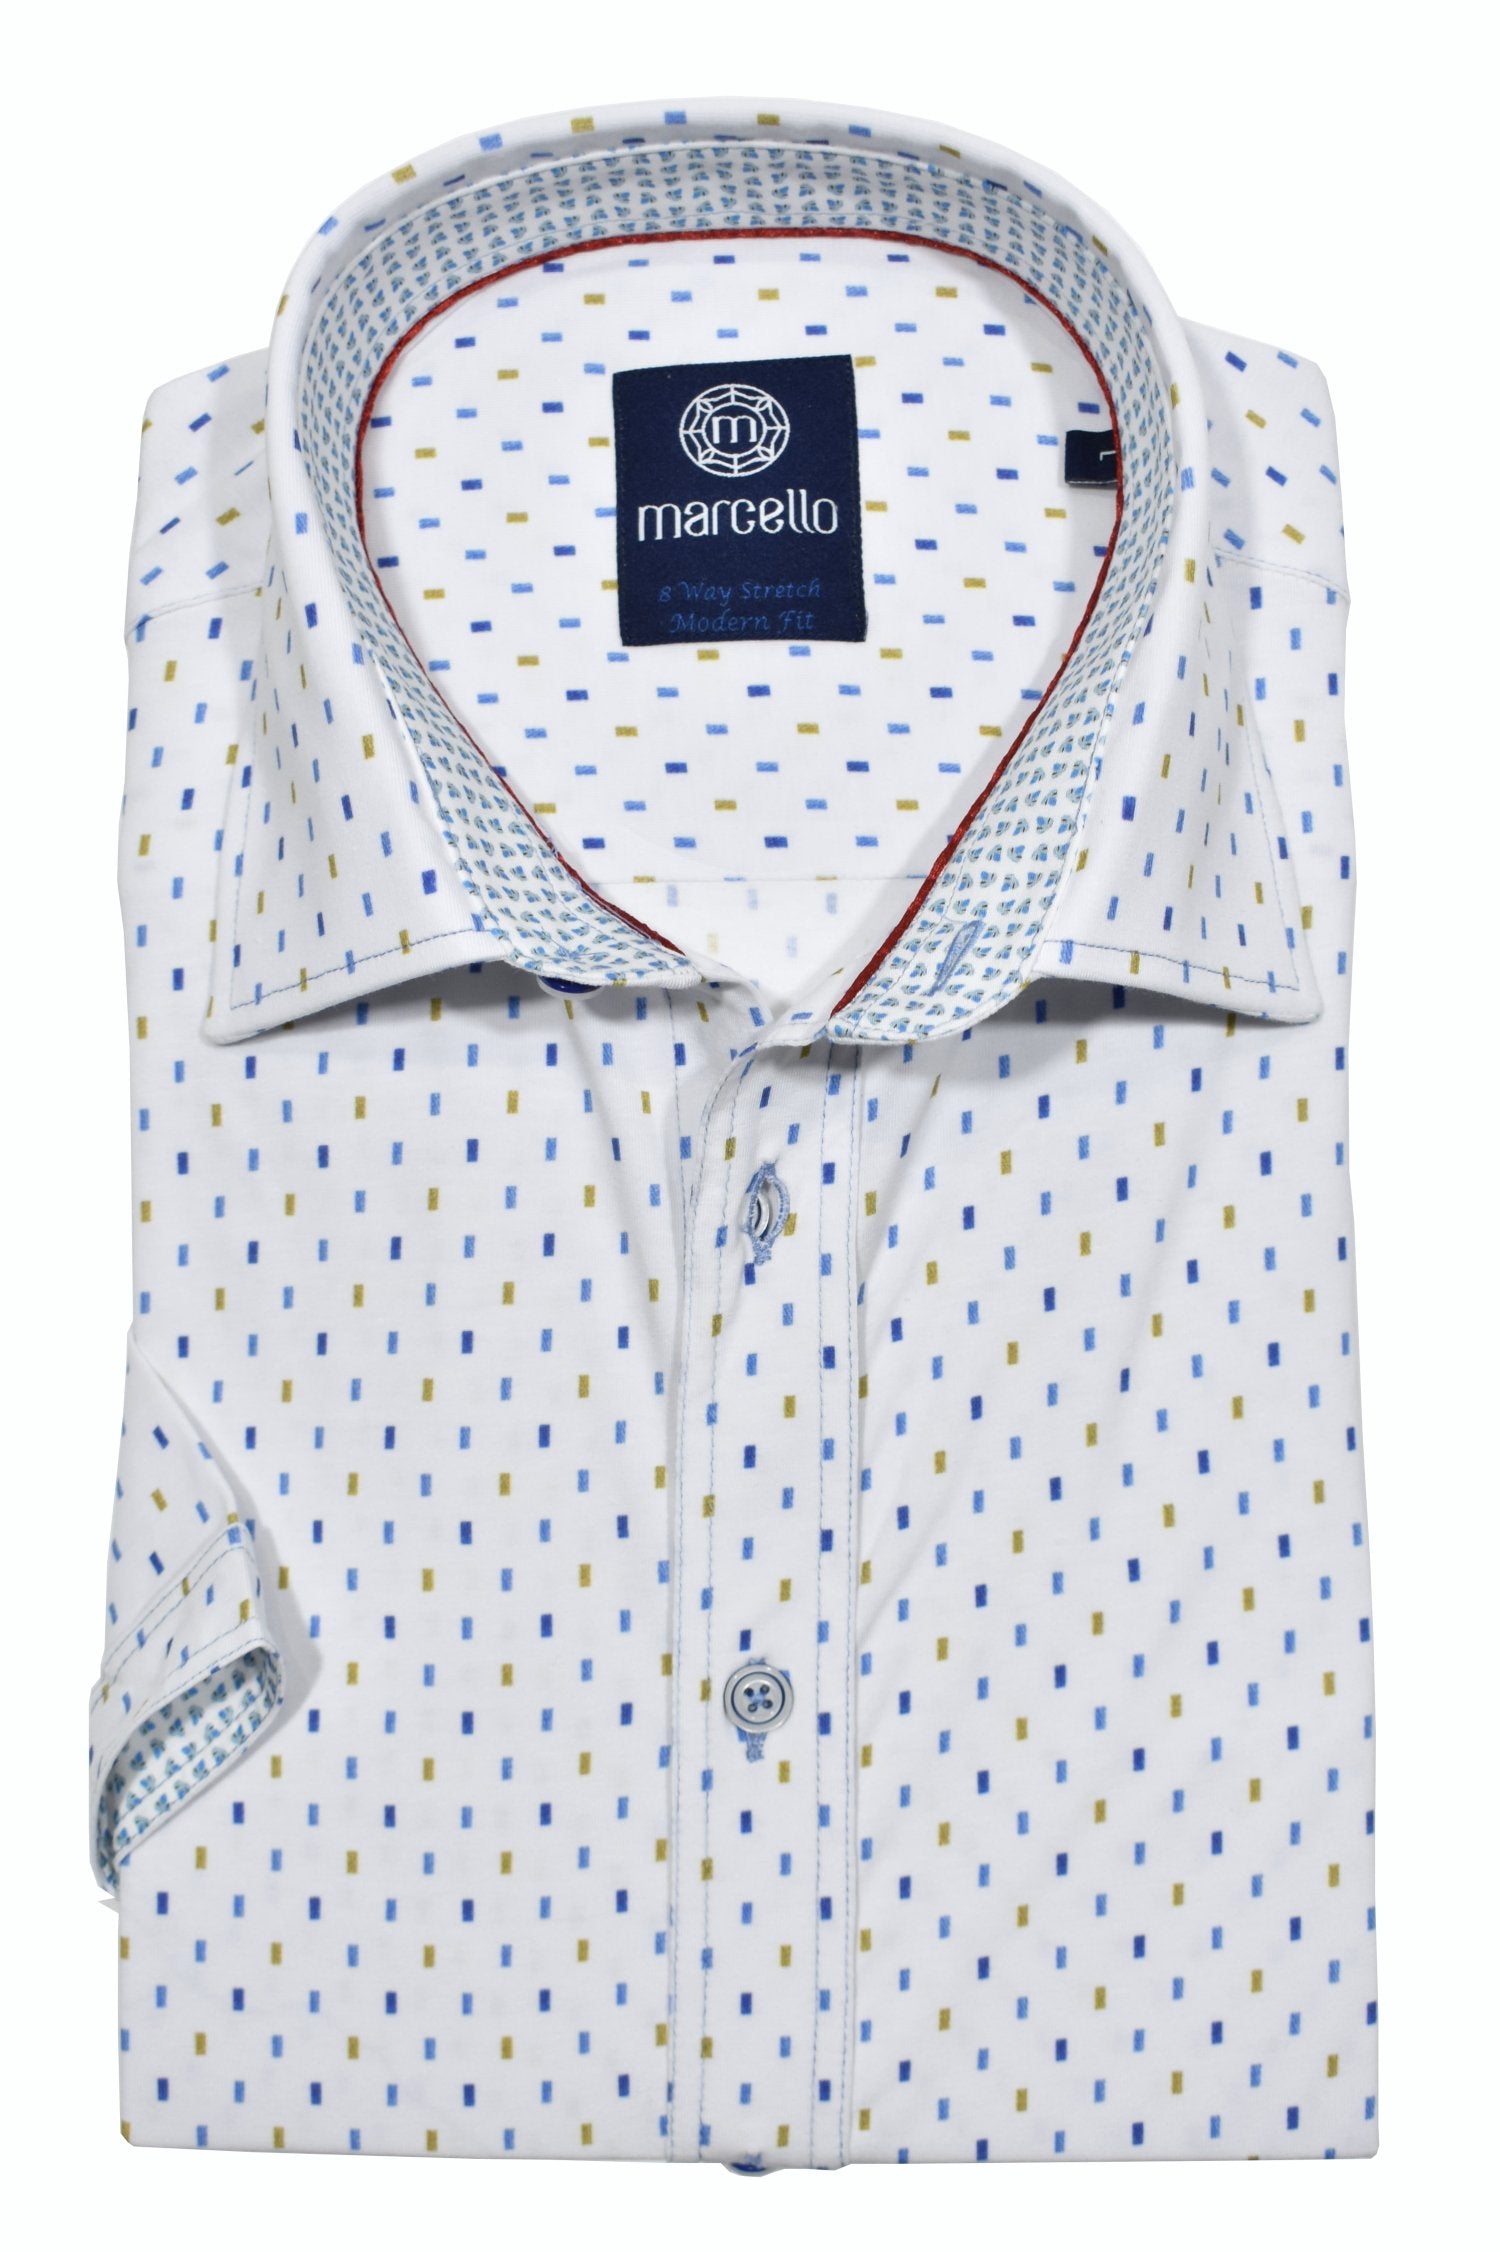 Sometimes a simple and clean pattern is just what is needed. The Marcello W804S Chiclet shirt features a clean pattern that works well with shorts, pants or jeans. Custom detailing and a soft cotton fabric, along with signature double track contrast stitch work completes the look.